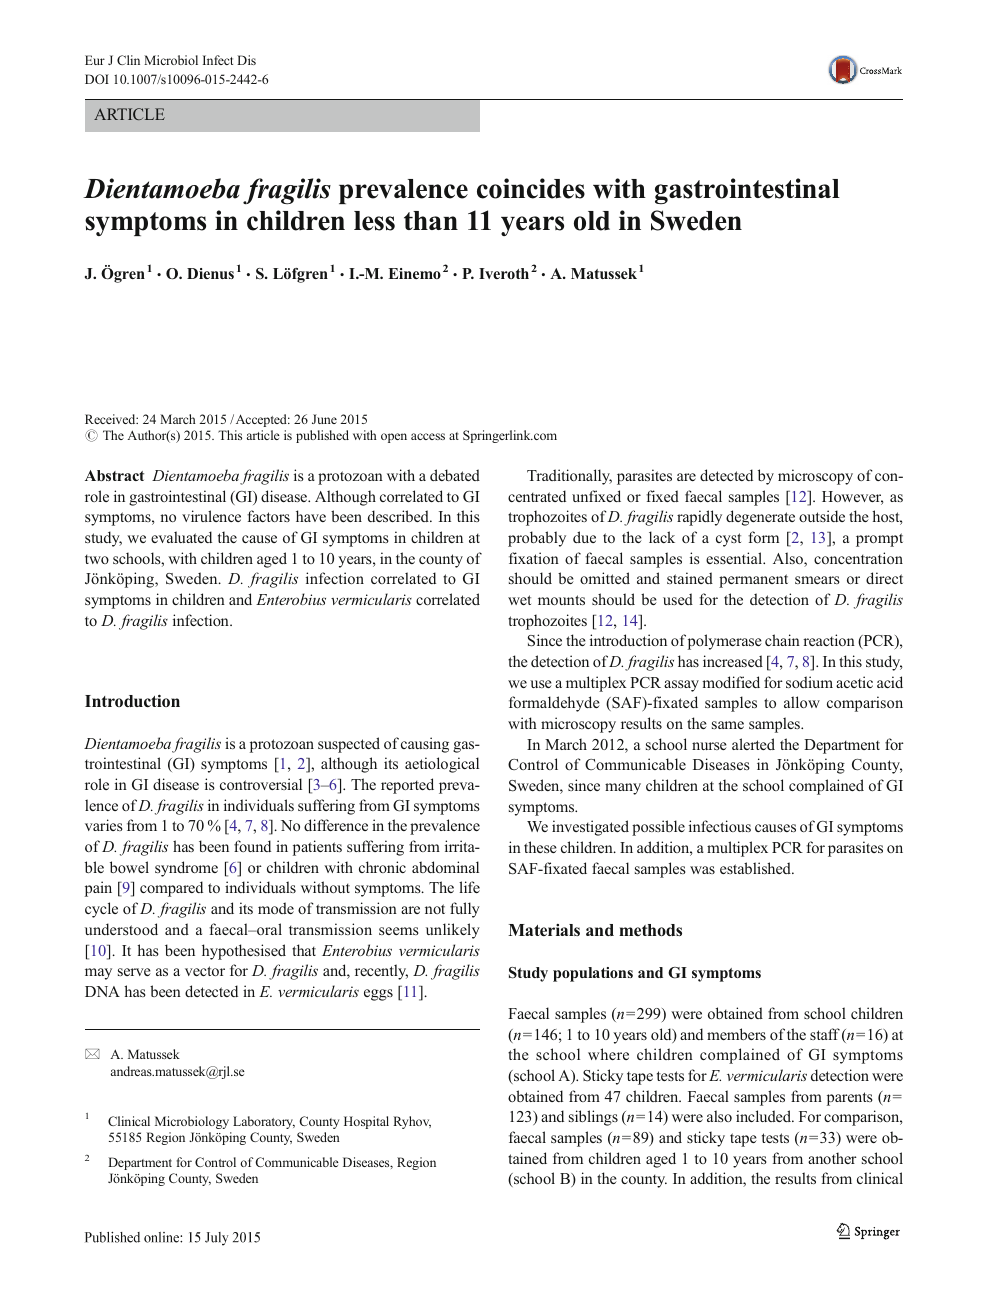 Dientamoeba Fragilis Prevalence Coincides With Gastrointestinal Symptoms In Children Less Than 11 Years Old In Sweden Topic Of Research Paper In Clinical Medicine Download Scholarly Article Pdf And Read For Free